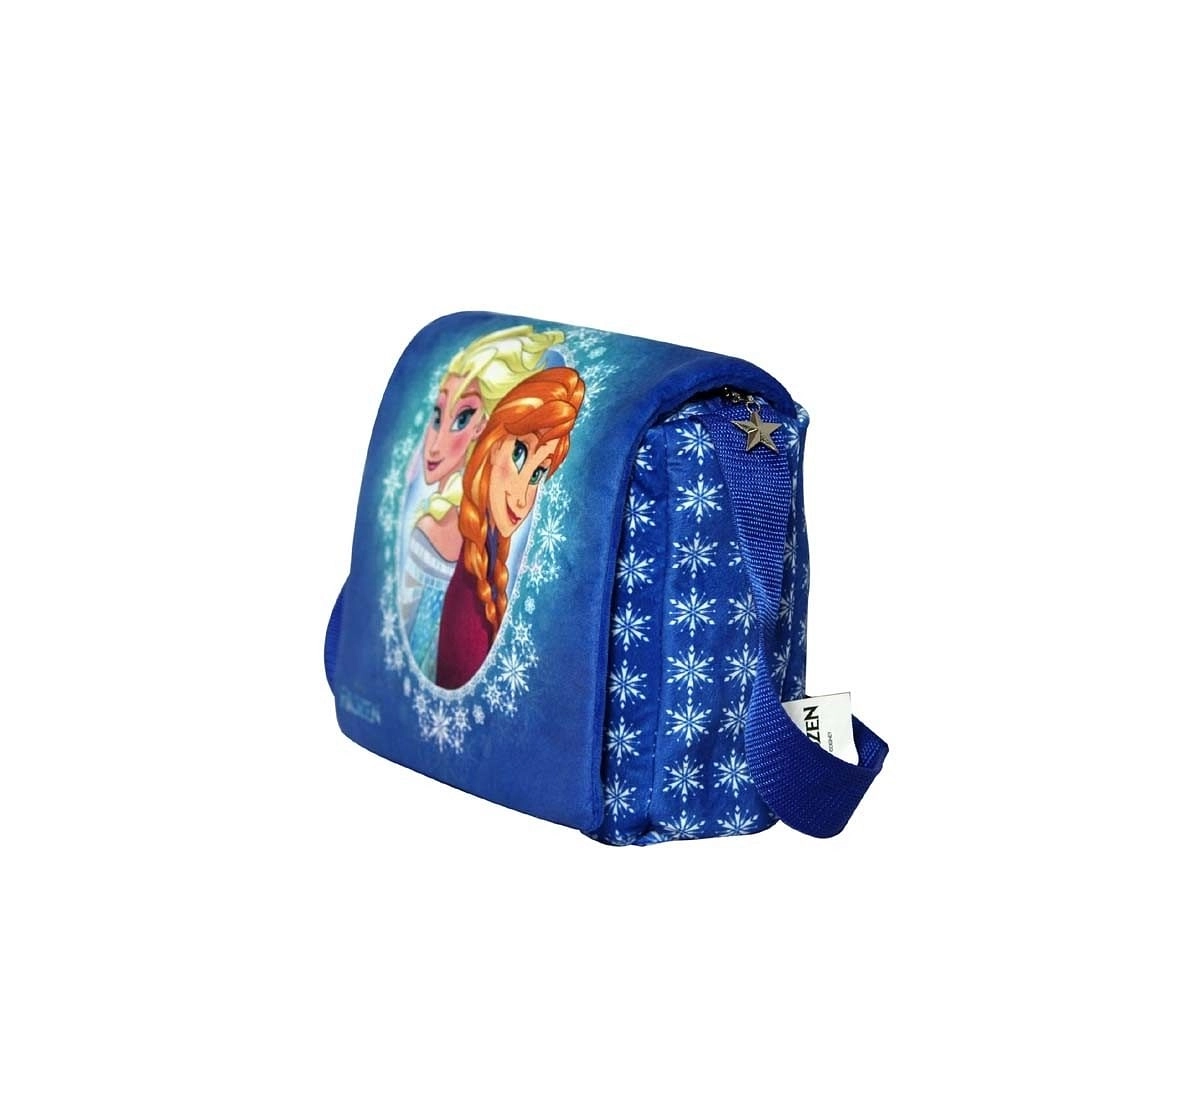 Marvel Blue Happiness Zipper Closure Frozen Princess Printed Sling Bag with Accessories for Kids age 12M+